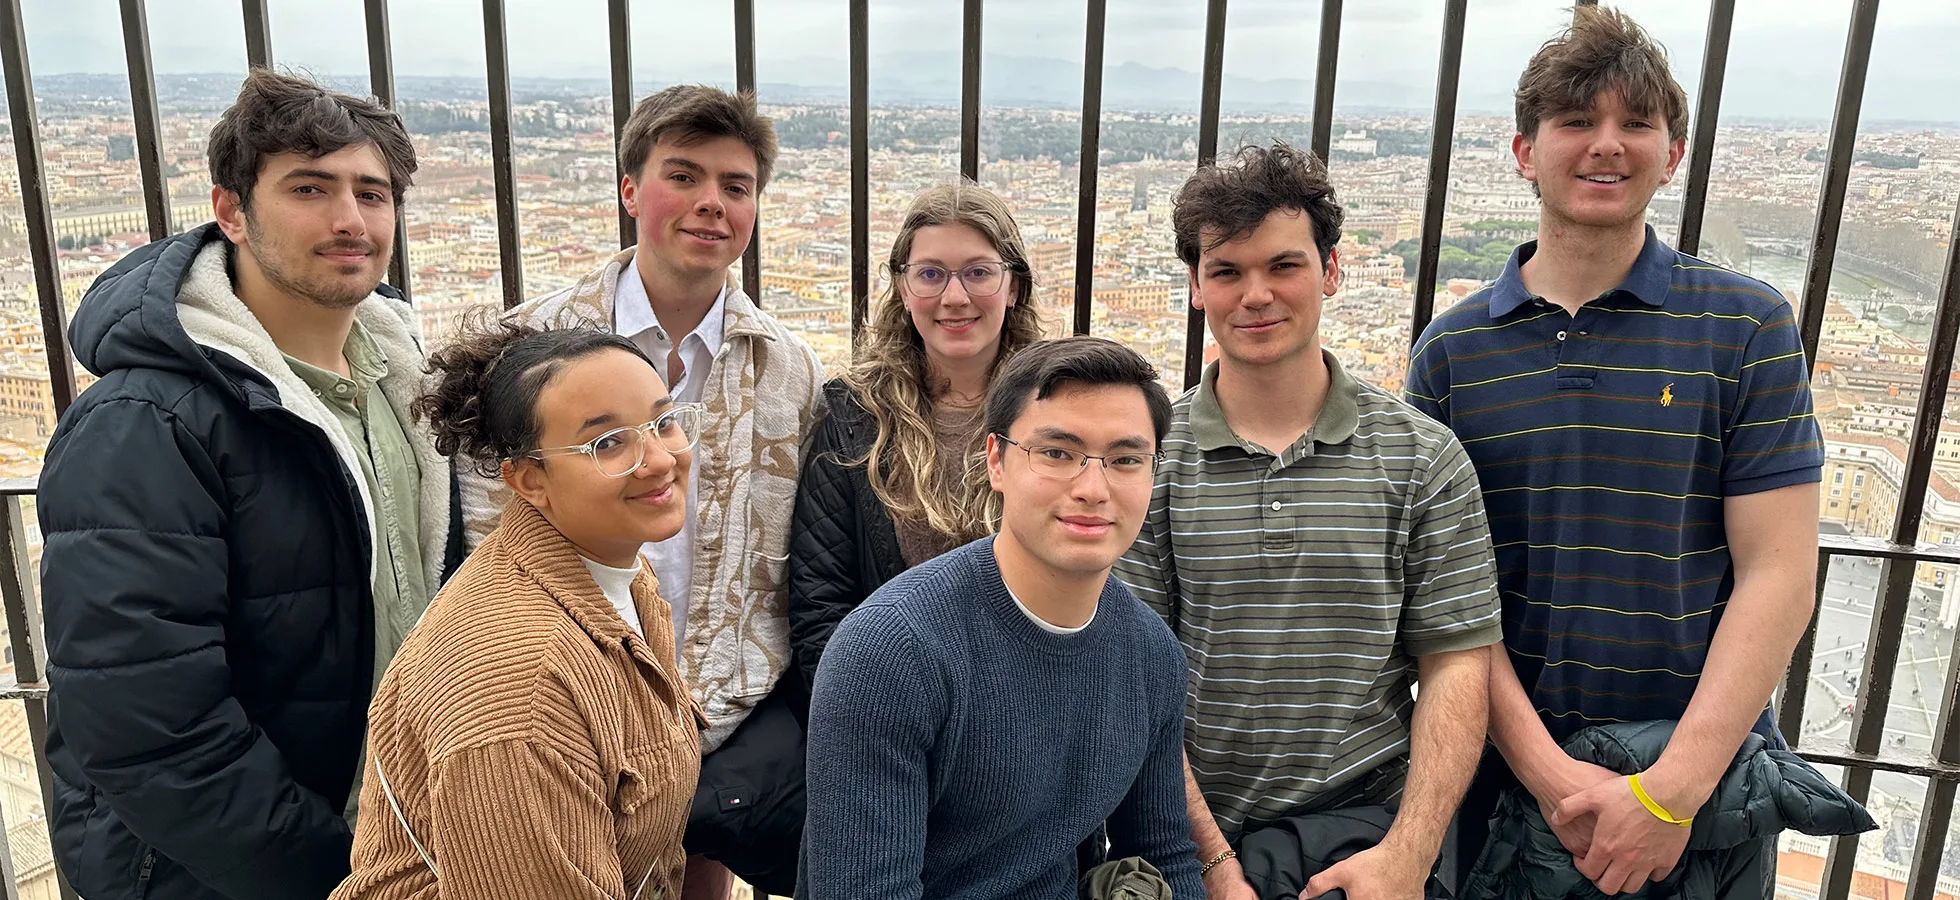 Students studying at Assumption’s Rome Campus this spring semester had the experience of a lifetime last Friday, March 8, when Pope Francis visited the campus’ local parish, the Church of San Pio V.